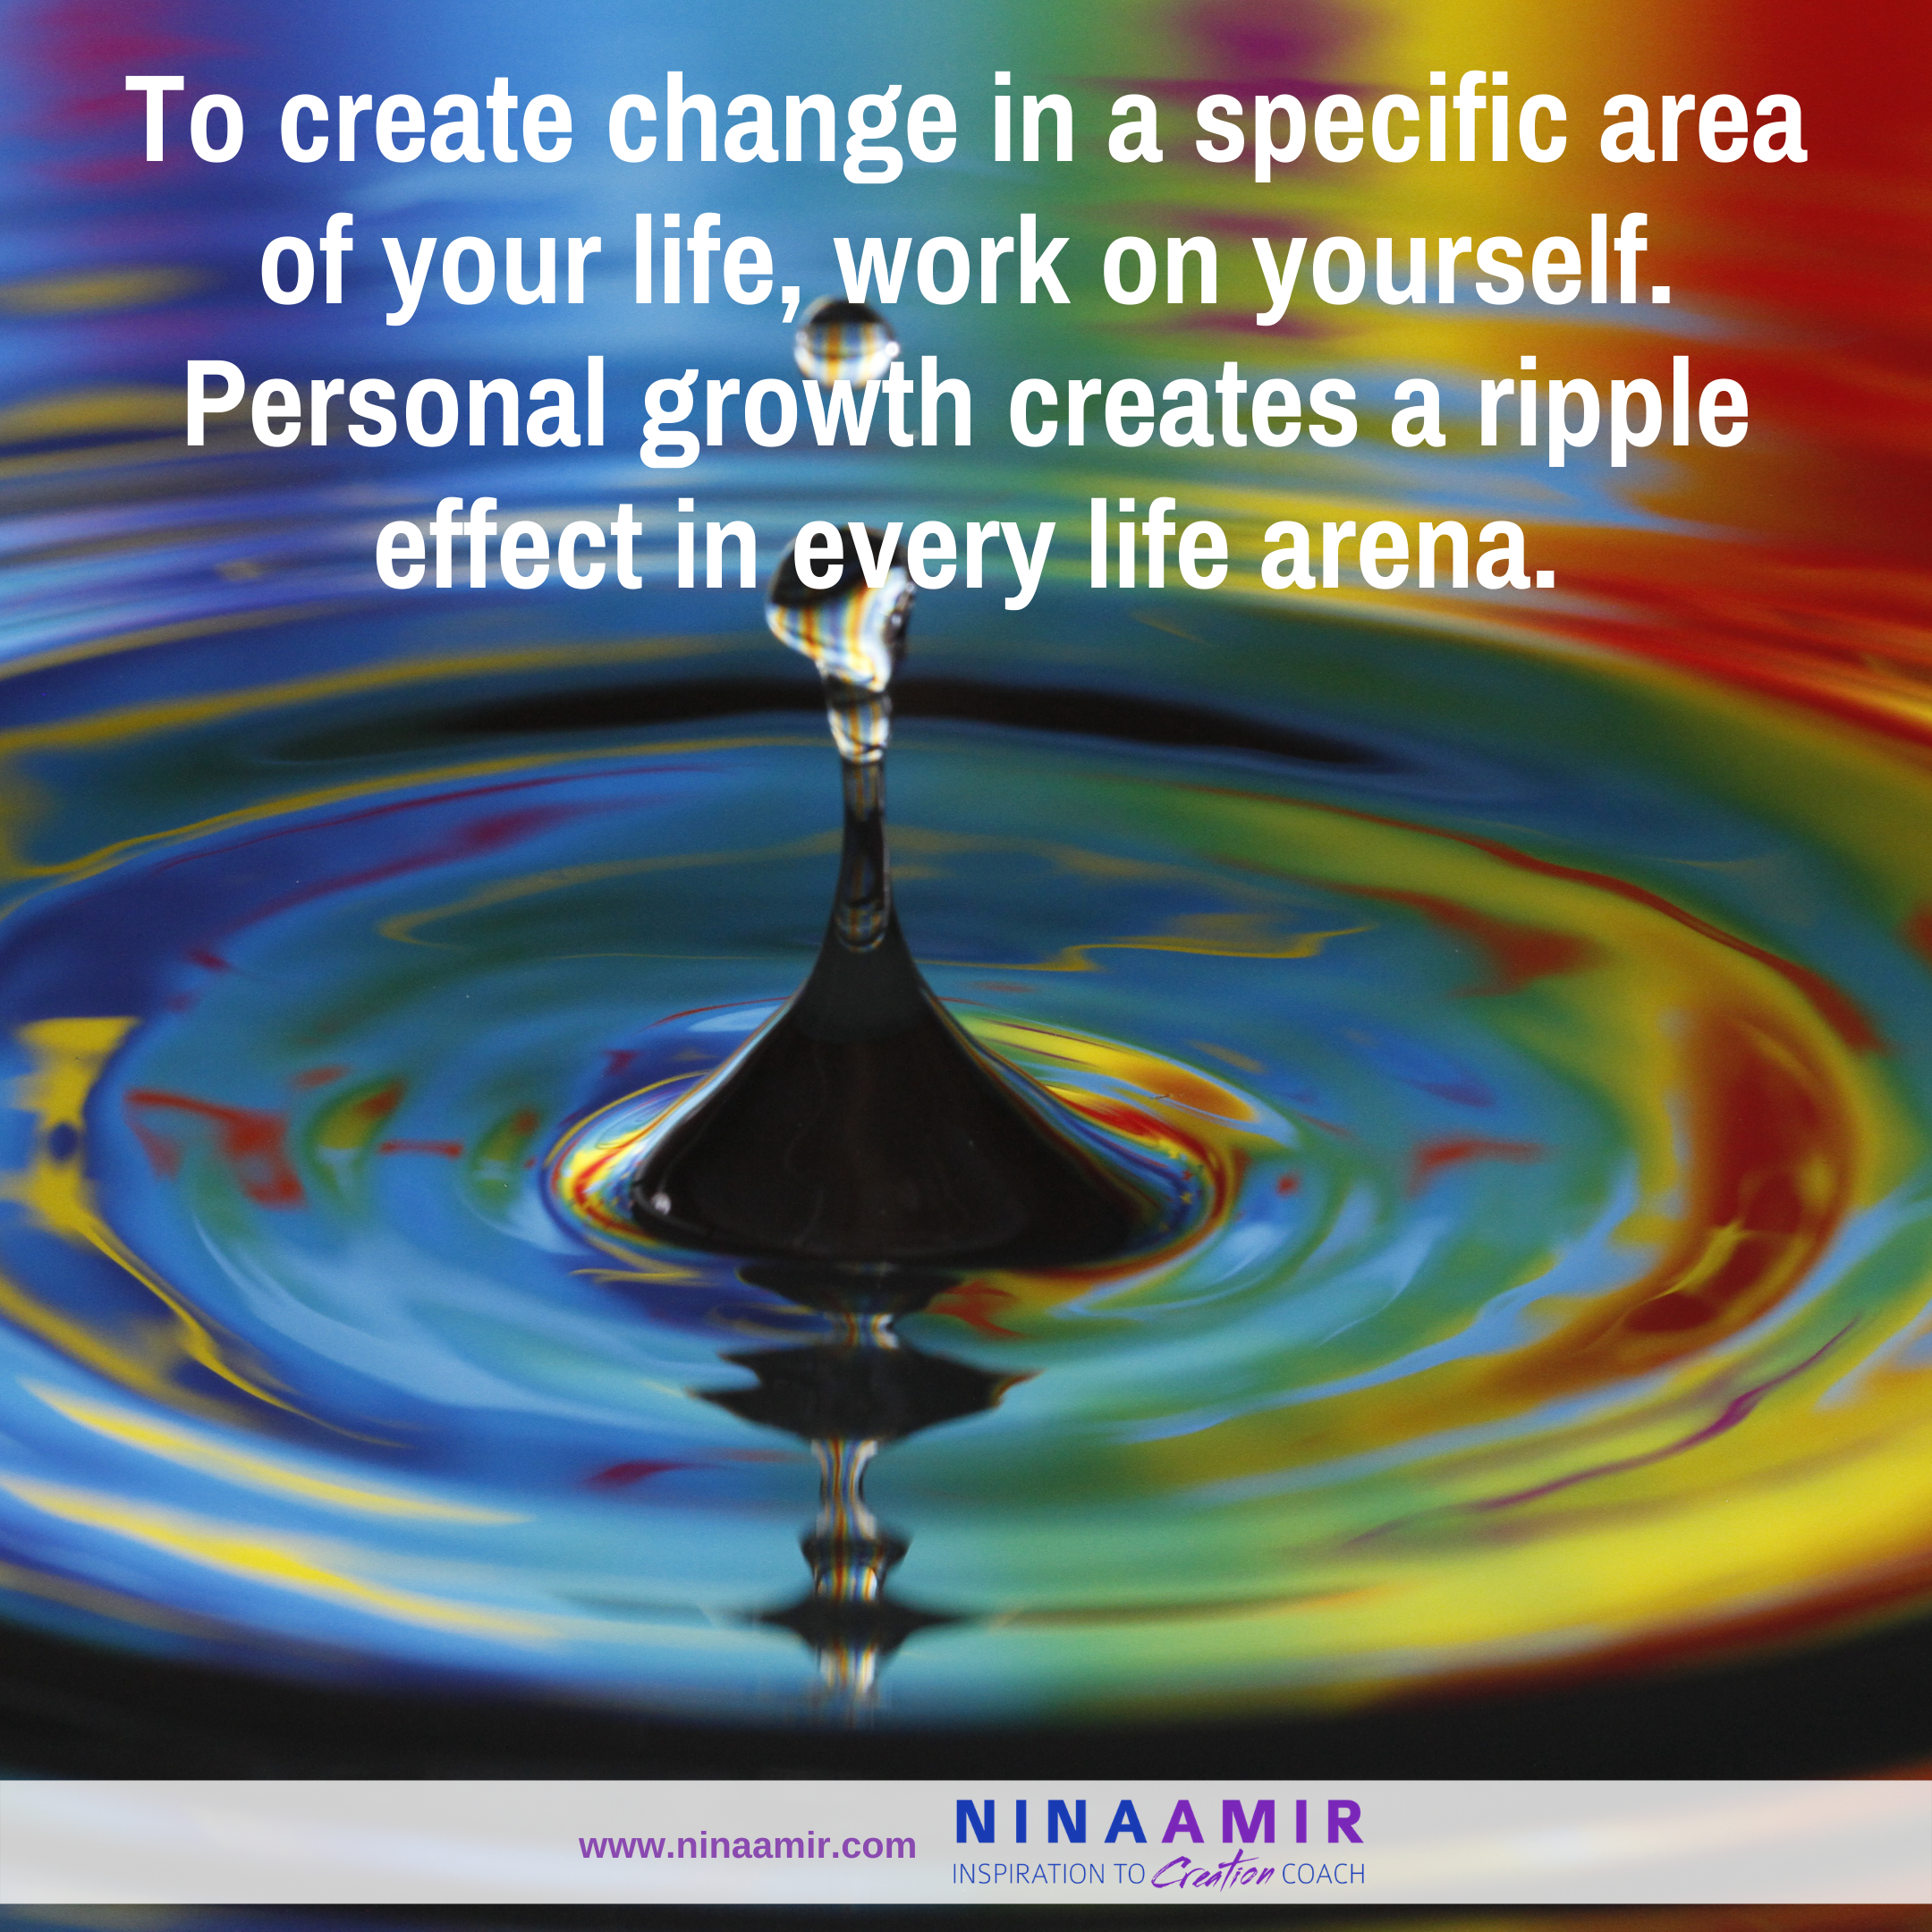 Personal development or personal growth affects every area of your life